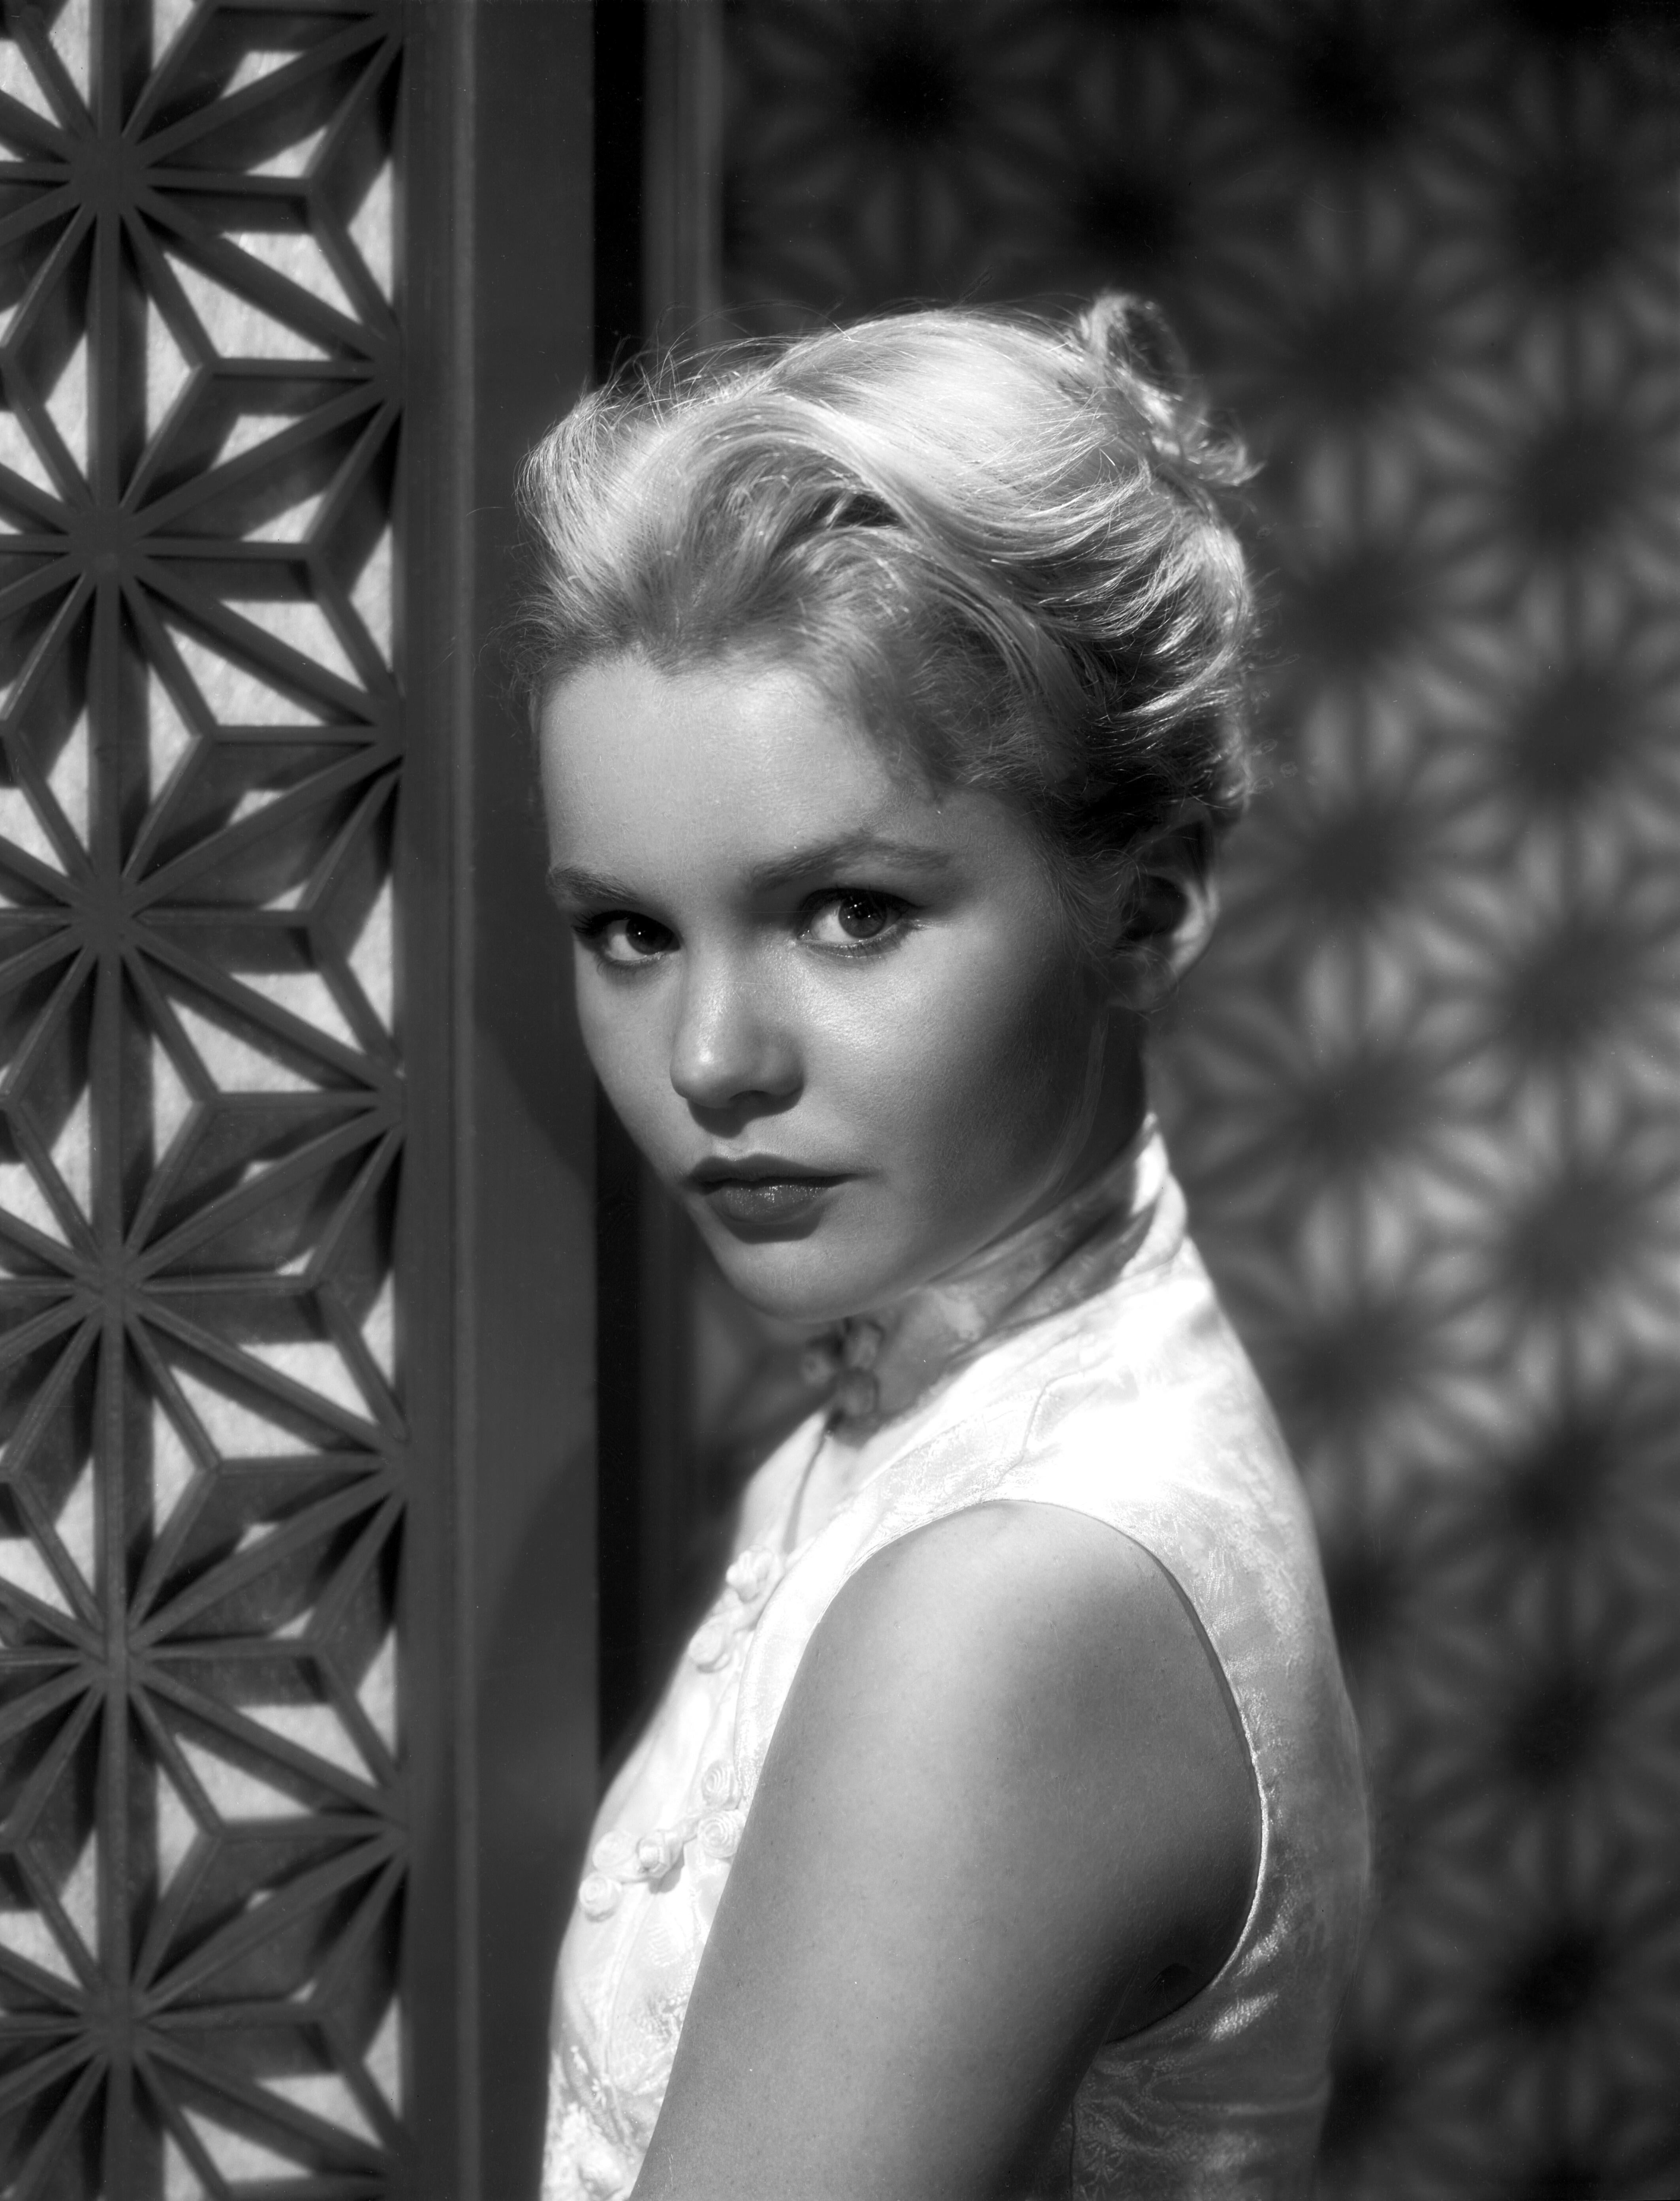 Unknown Black and White Photograph - Tuesday Weld: Young and Glamorous Movie Star News Fine Art Print